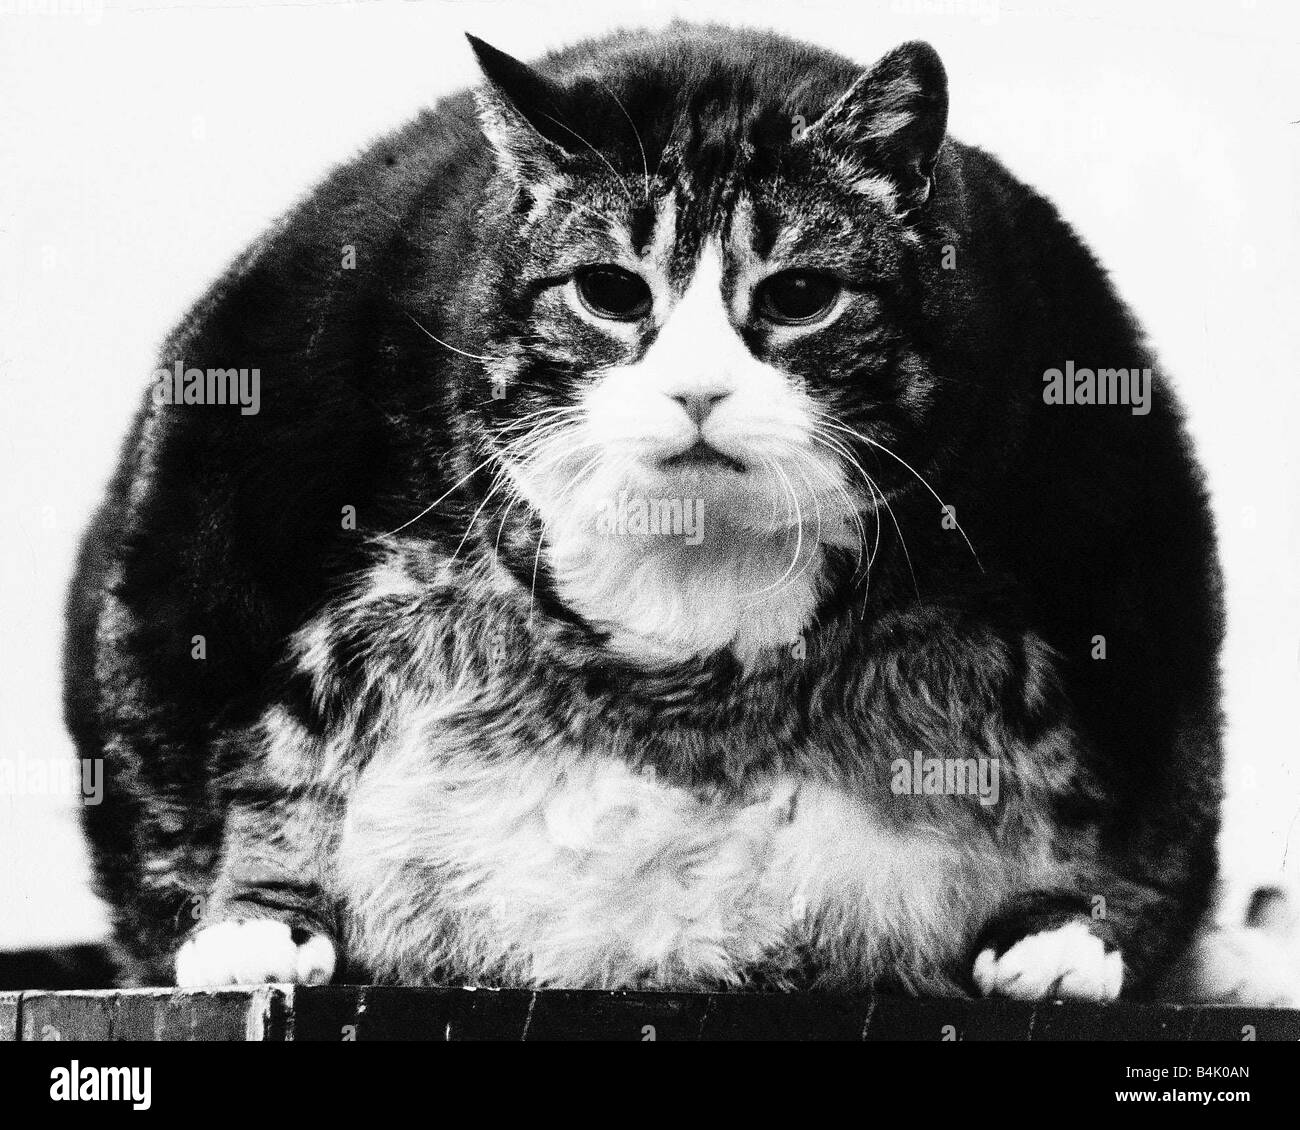 Tiddles the cat At 12 years old three feet long one foot wide and weighing 30lb Perhaps Tiddles wasnt the most appropriate name Stock Photo